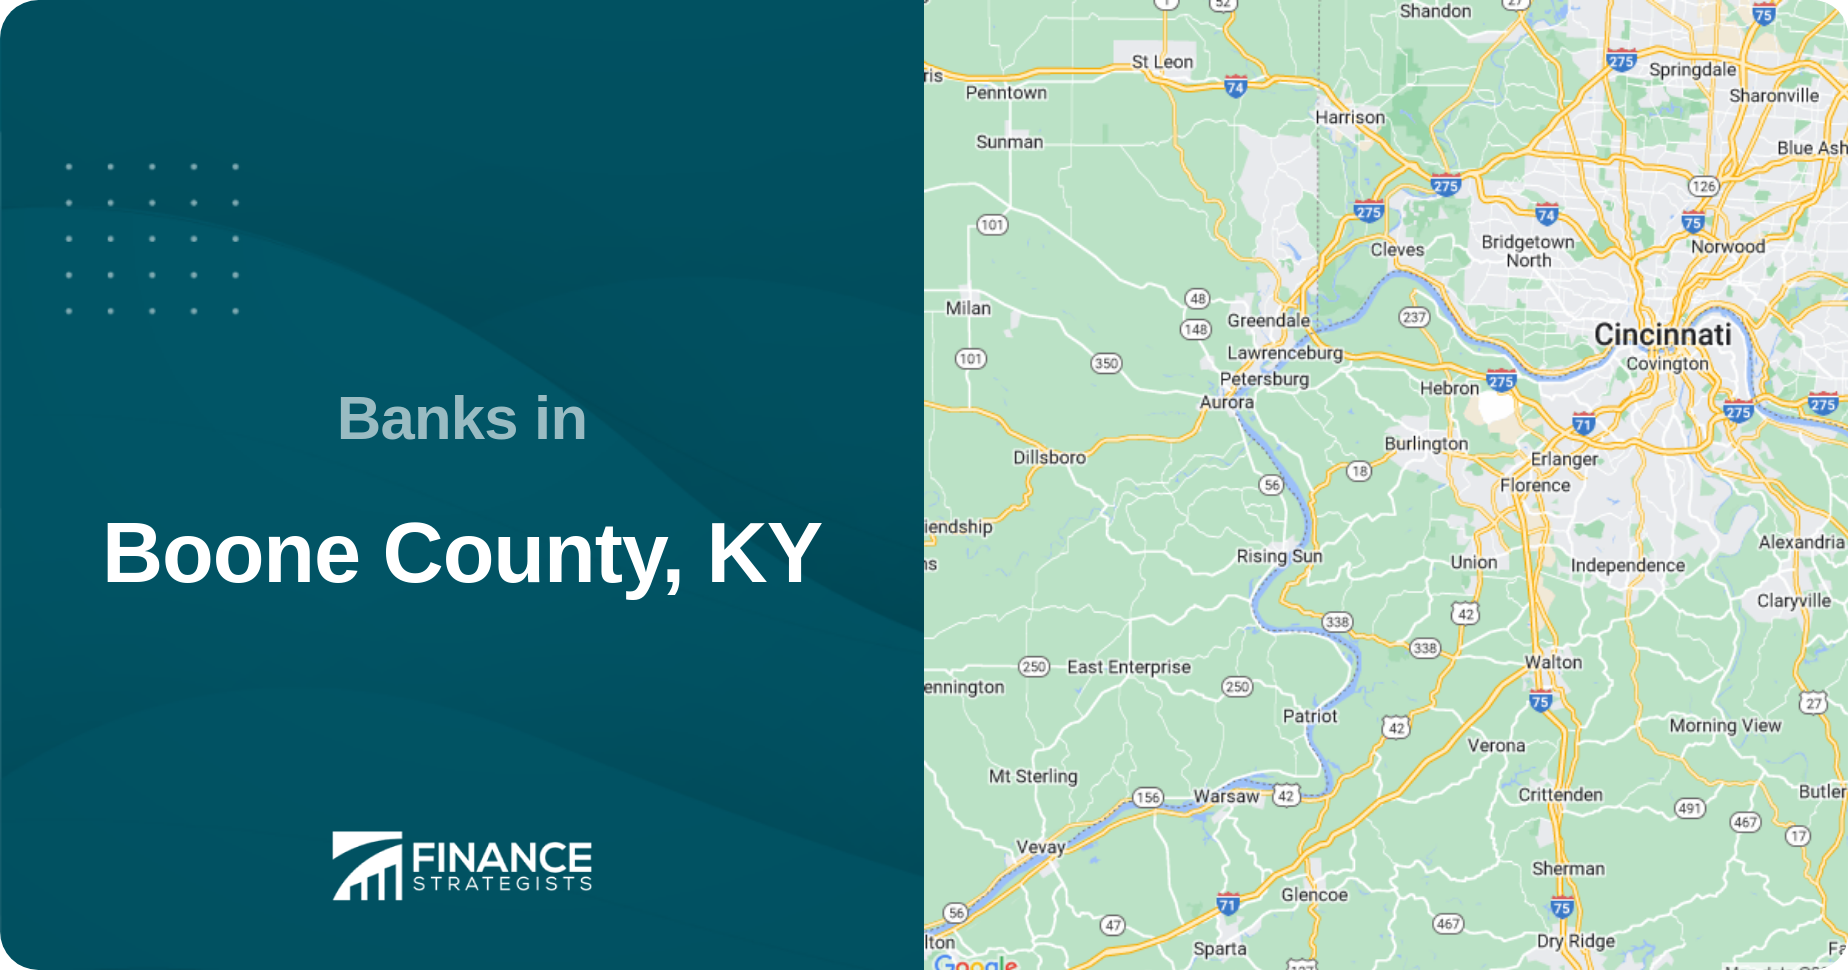 Banks in Boone County, KY